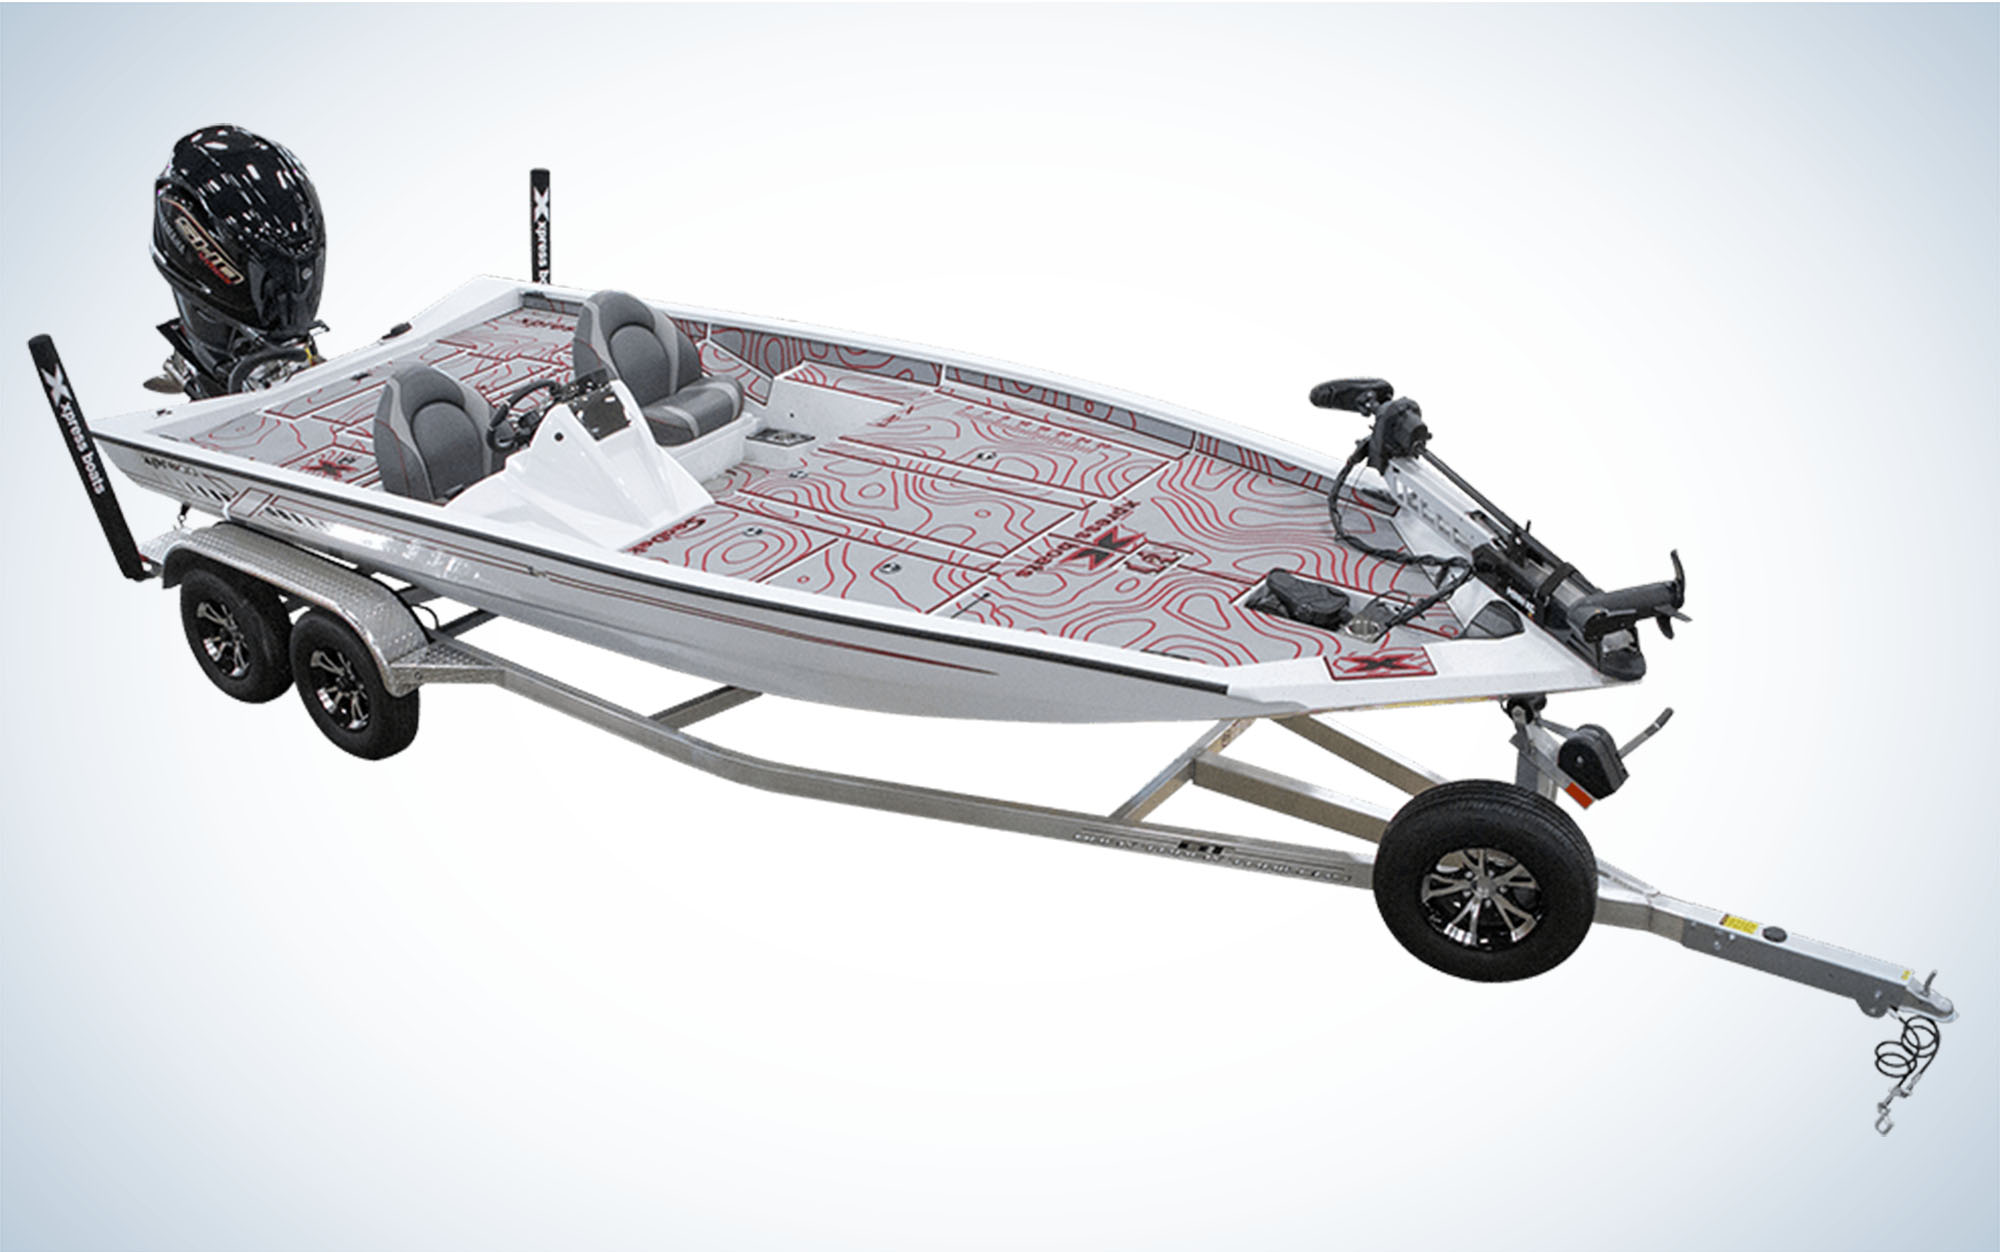 The Xpress X21 Pro is one of the best bass boats.